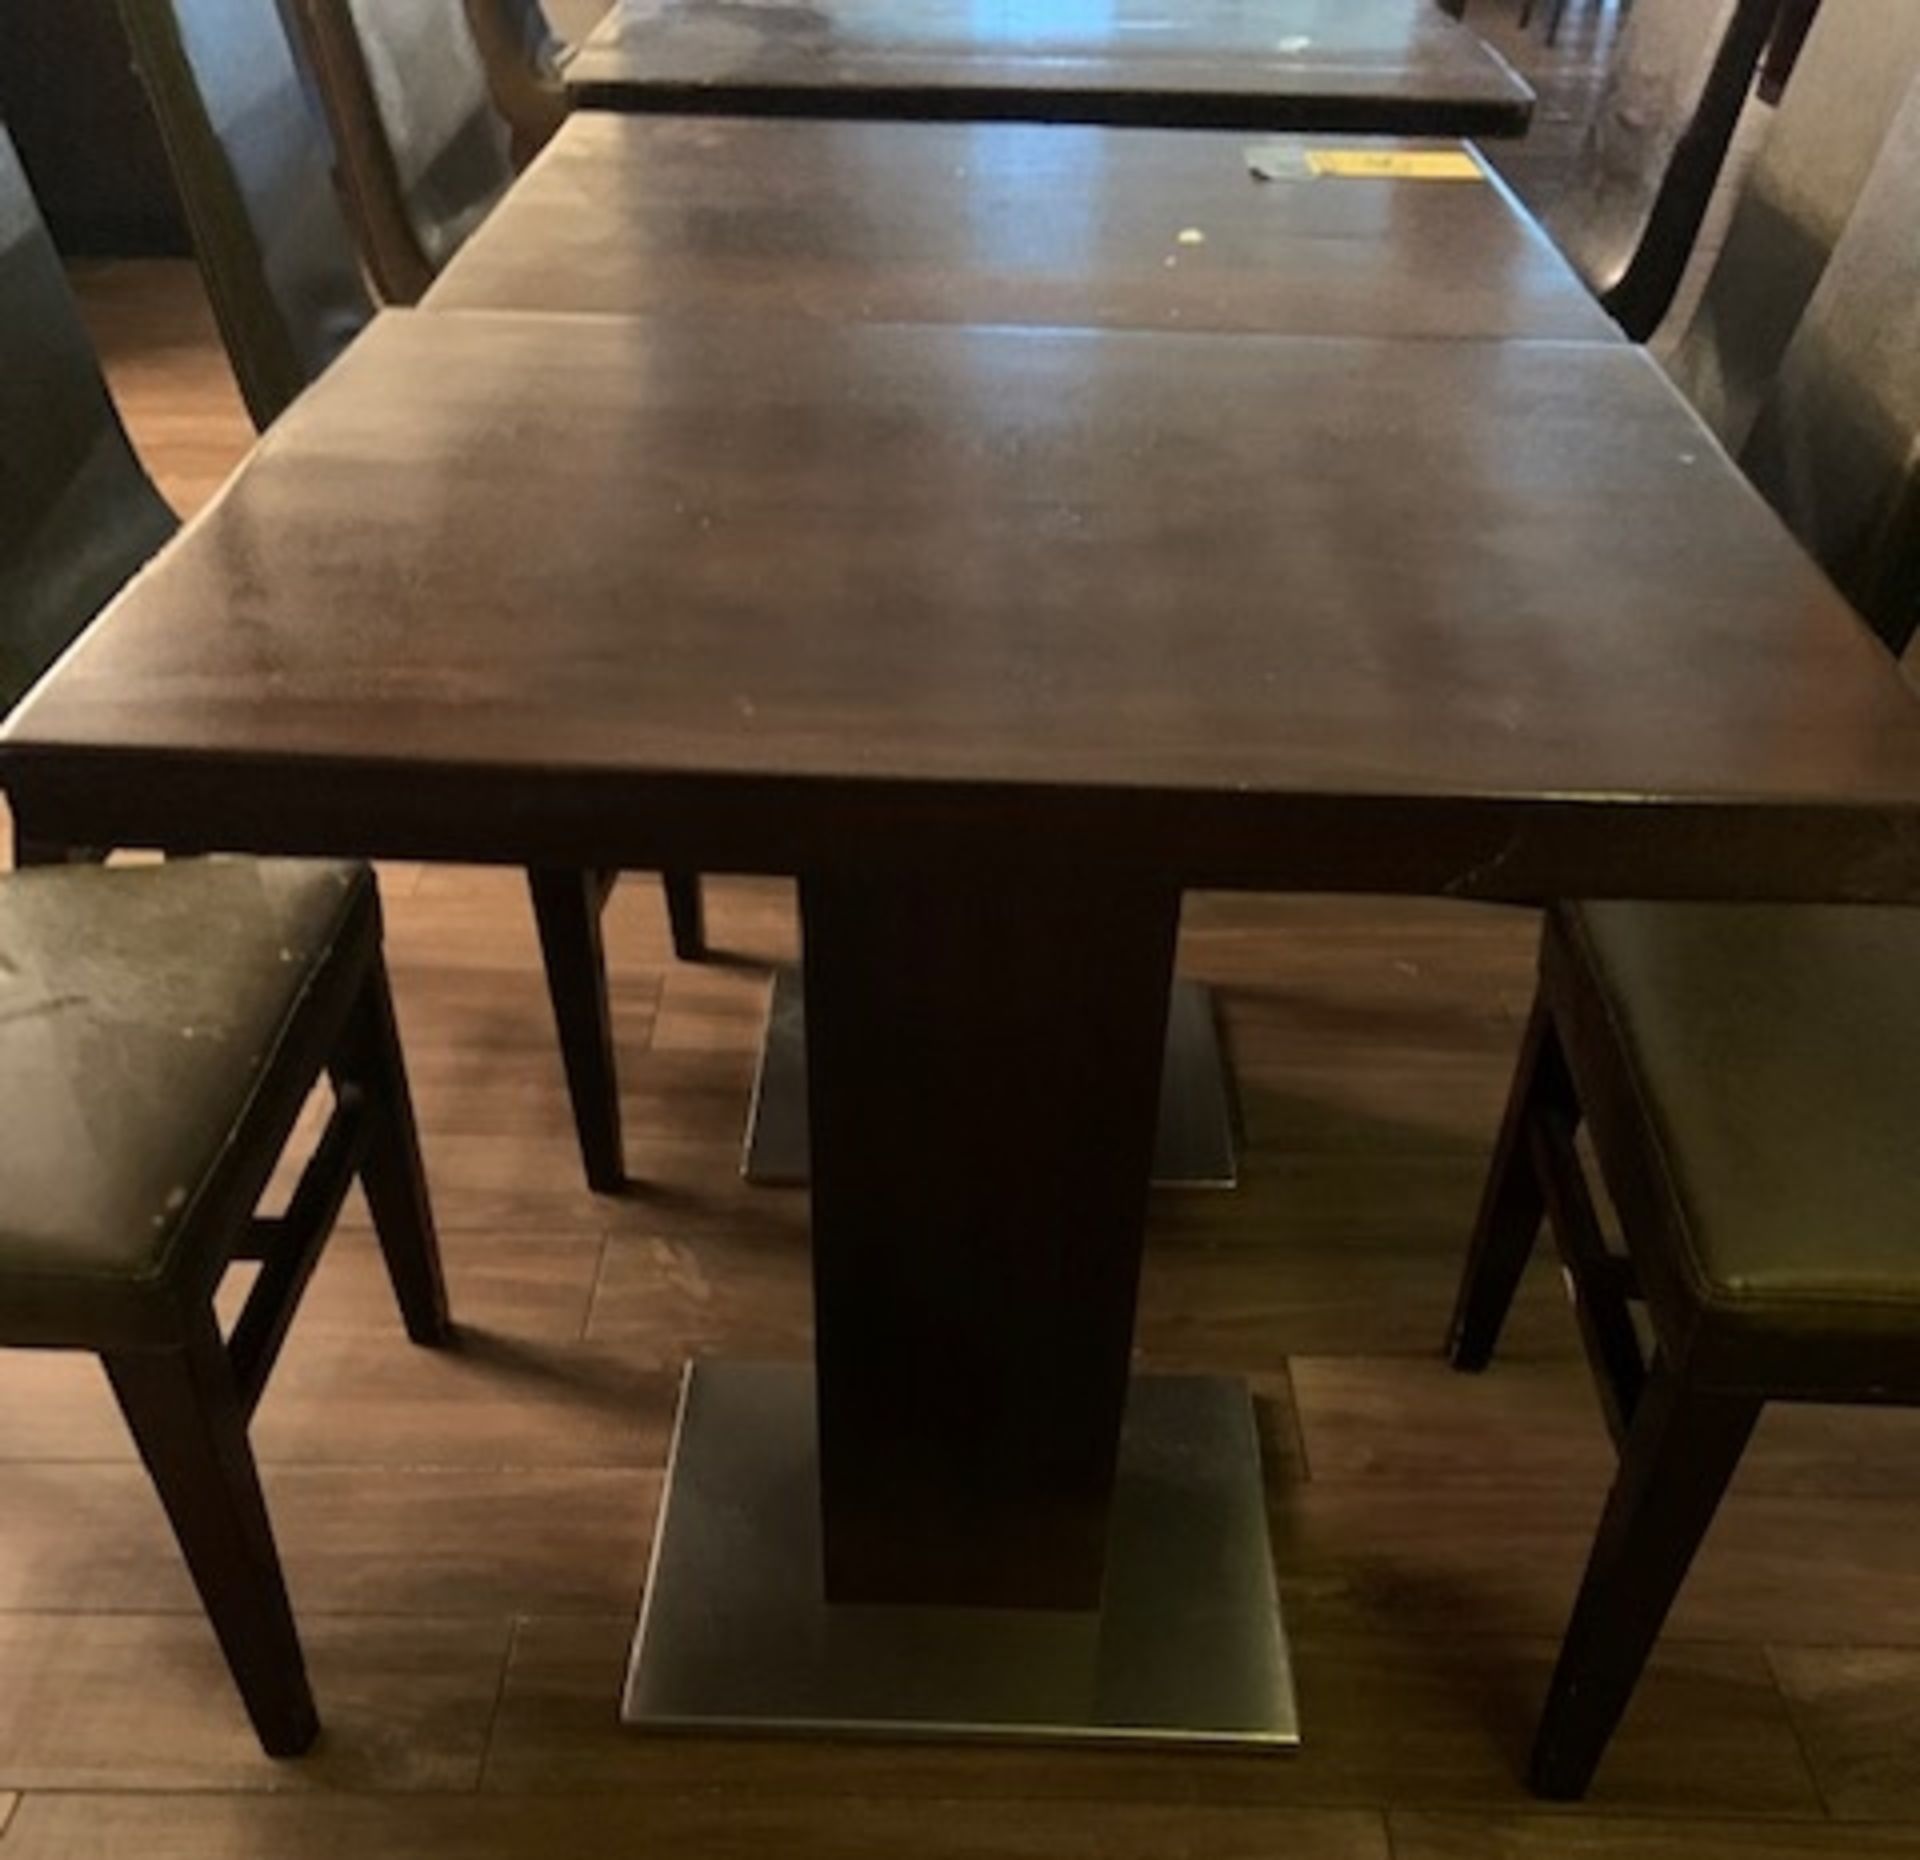 (2) 24" x30" Wood Top Tables, 1st Floor Hive Lounge